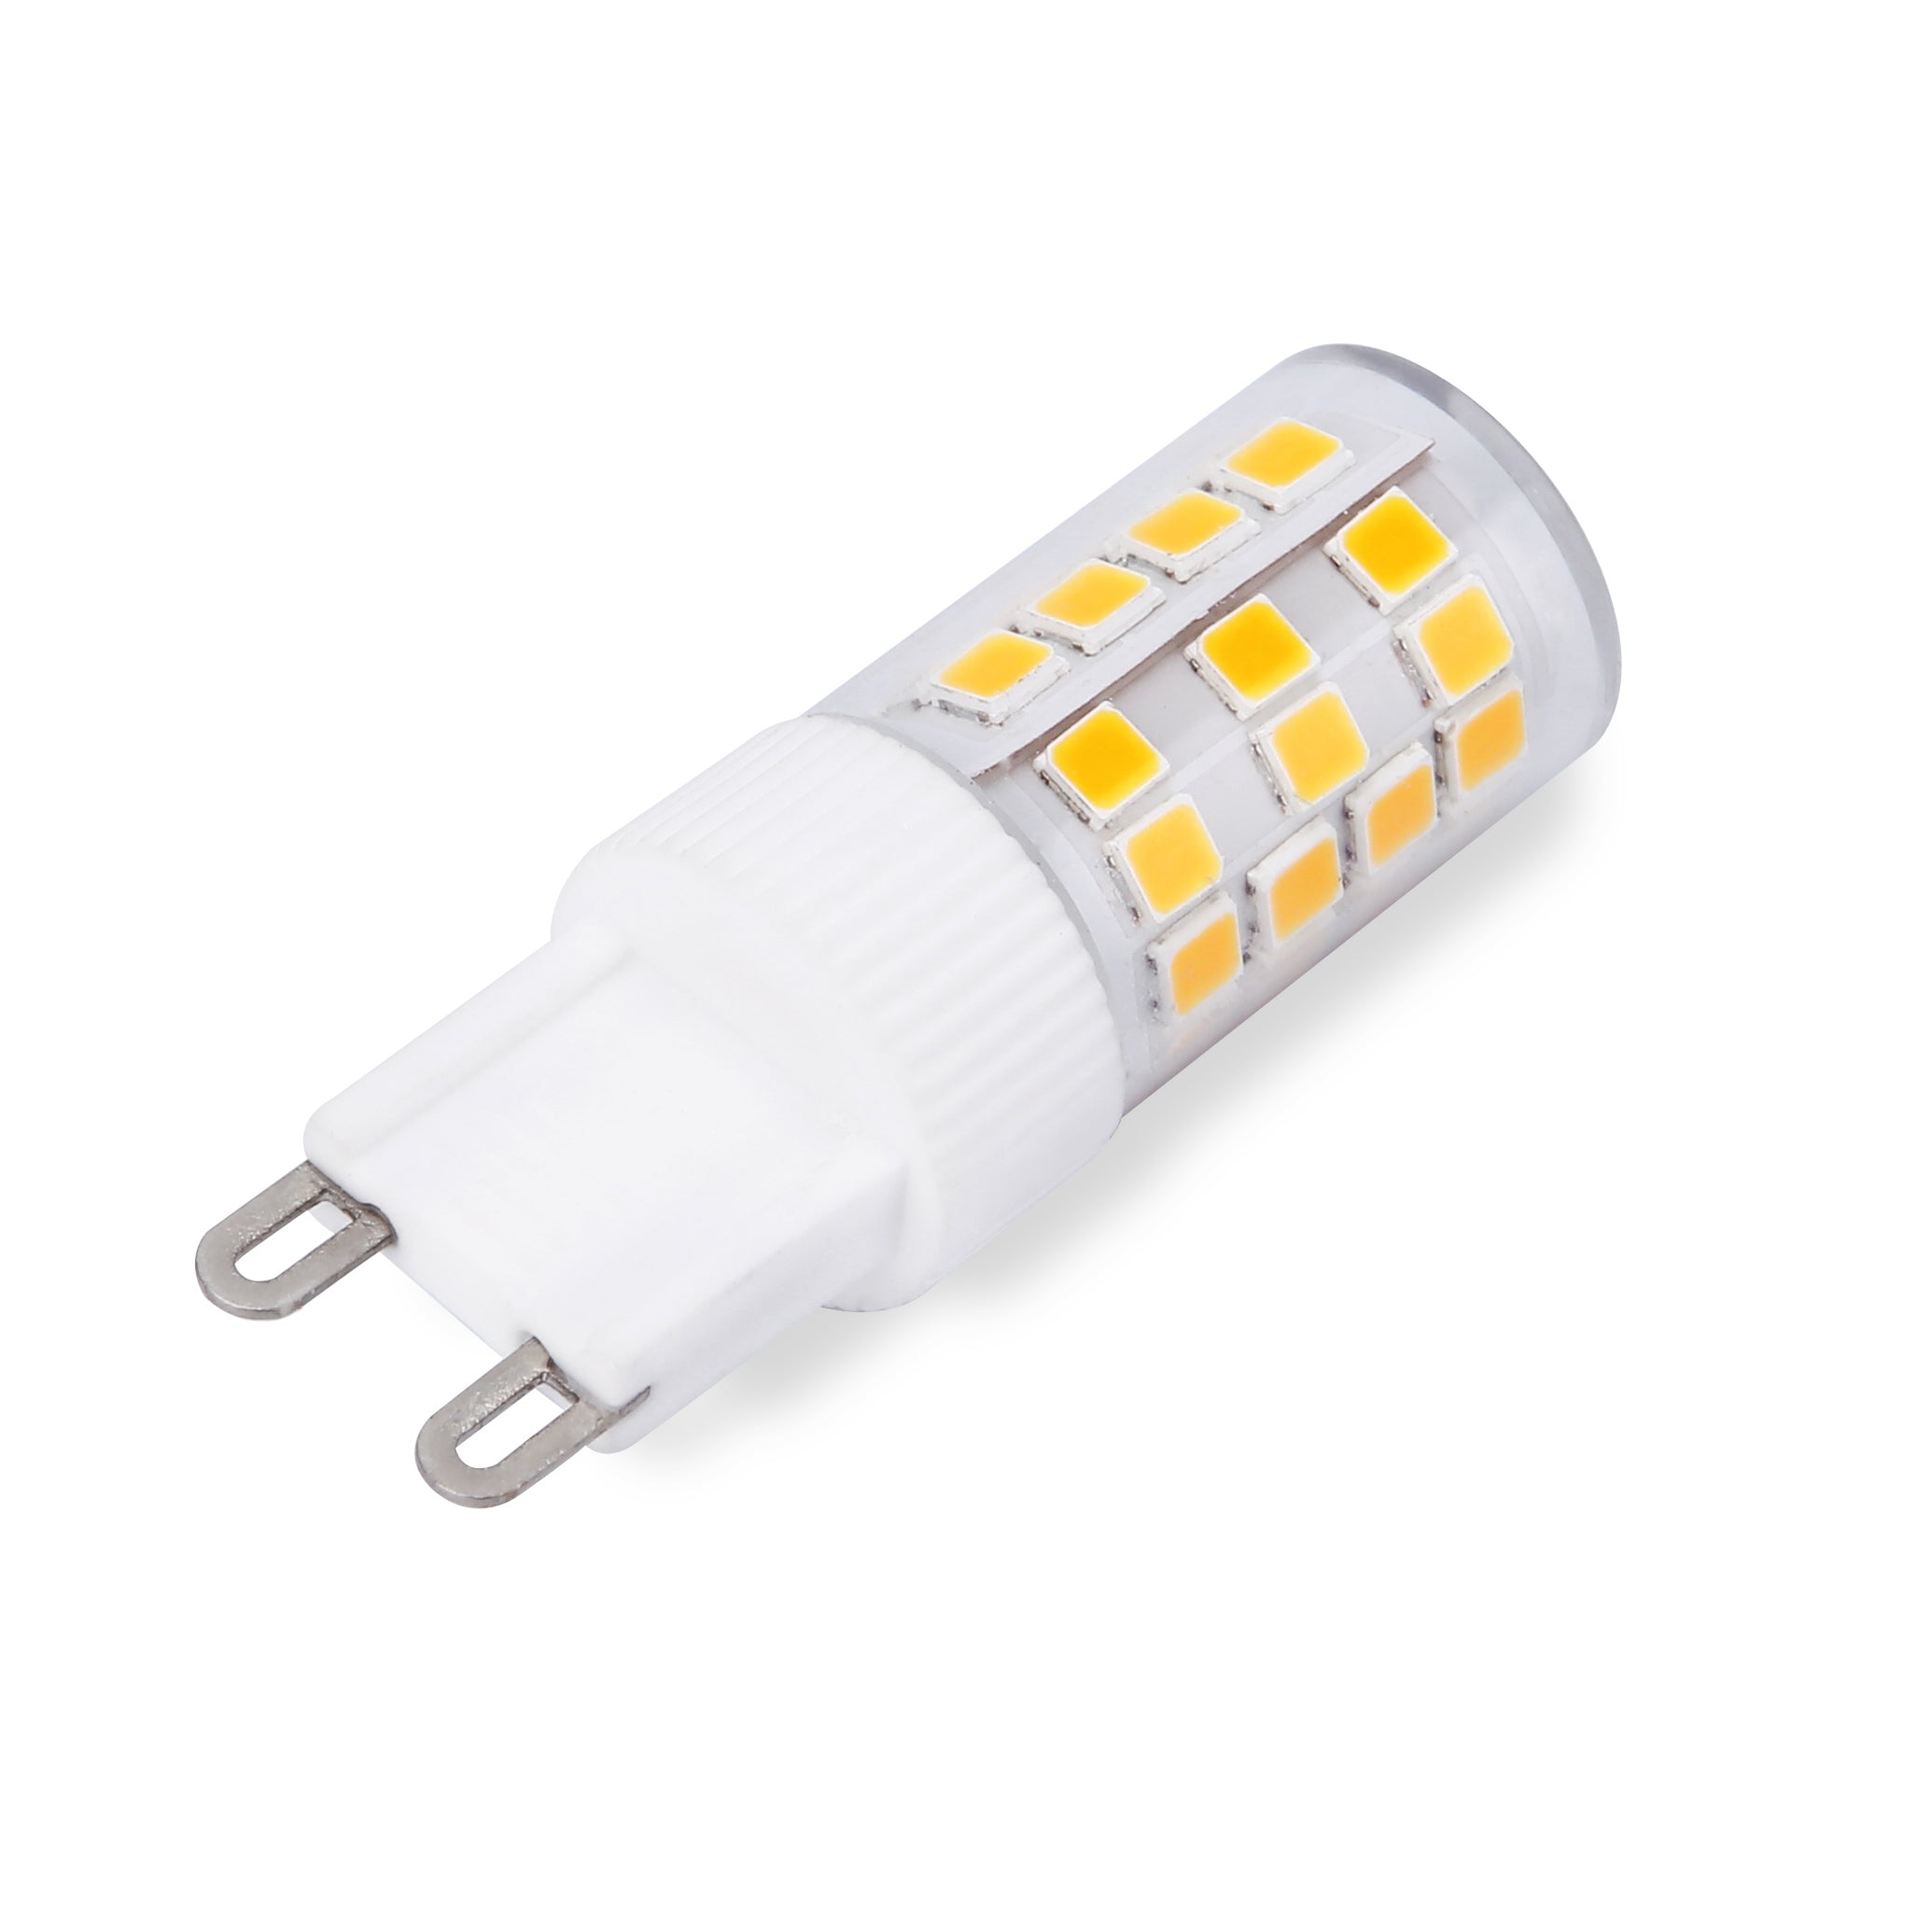 LED G9 4w Warm White Dimmable